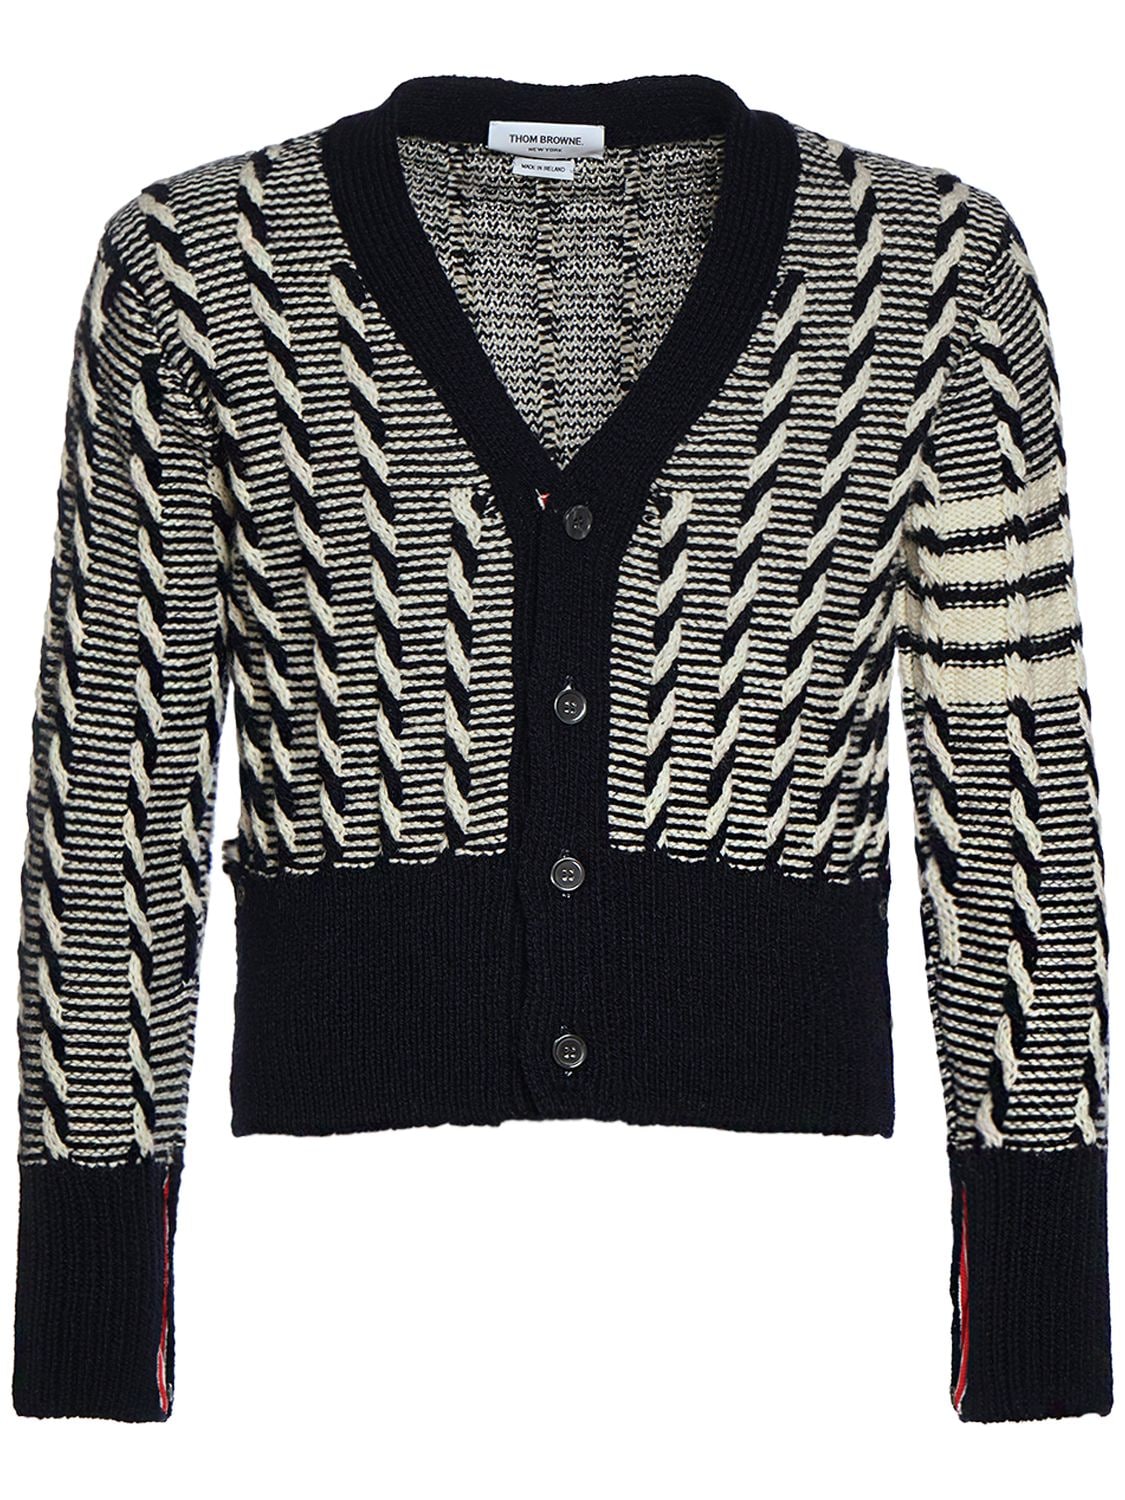 Image of Bicolor Twist Cable V-neck Cardigan